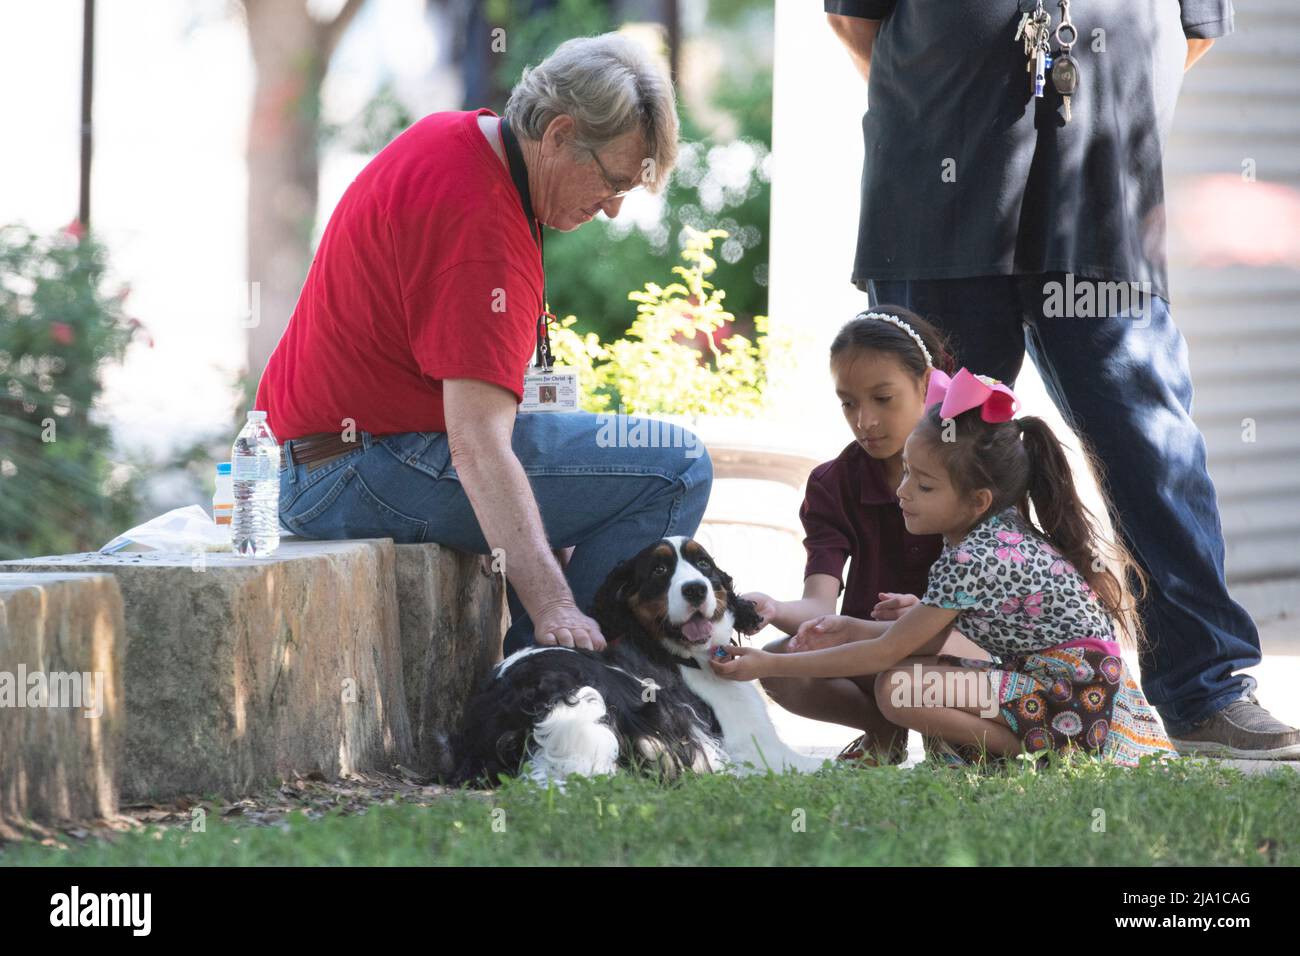 Uvalde, United States. 26th May, 2022. Children play with a therapy dog outside the Civic Center in Uvalde, Texas where counselors are welcoming the public after Tuesday's mass shooting at Robb Elementary School. A gunman killed 19 children and two teachers. Credit: Bob Daemmrich/Alamy Live News Stock Photo